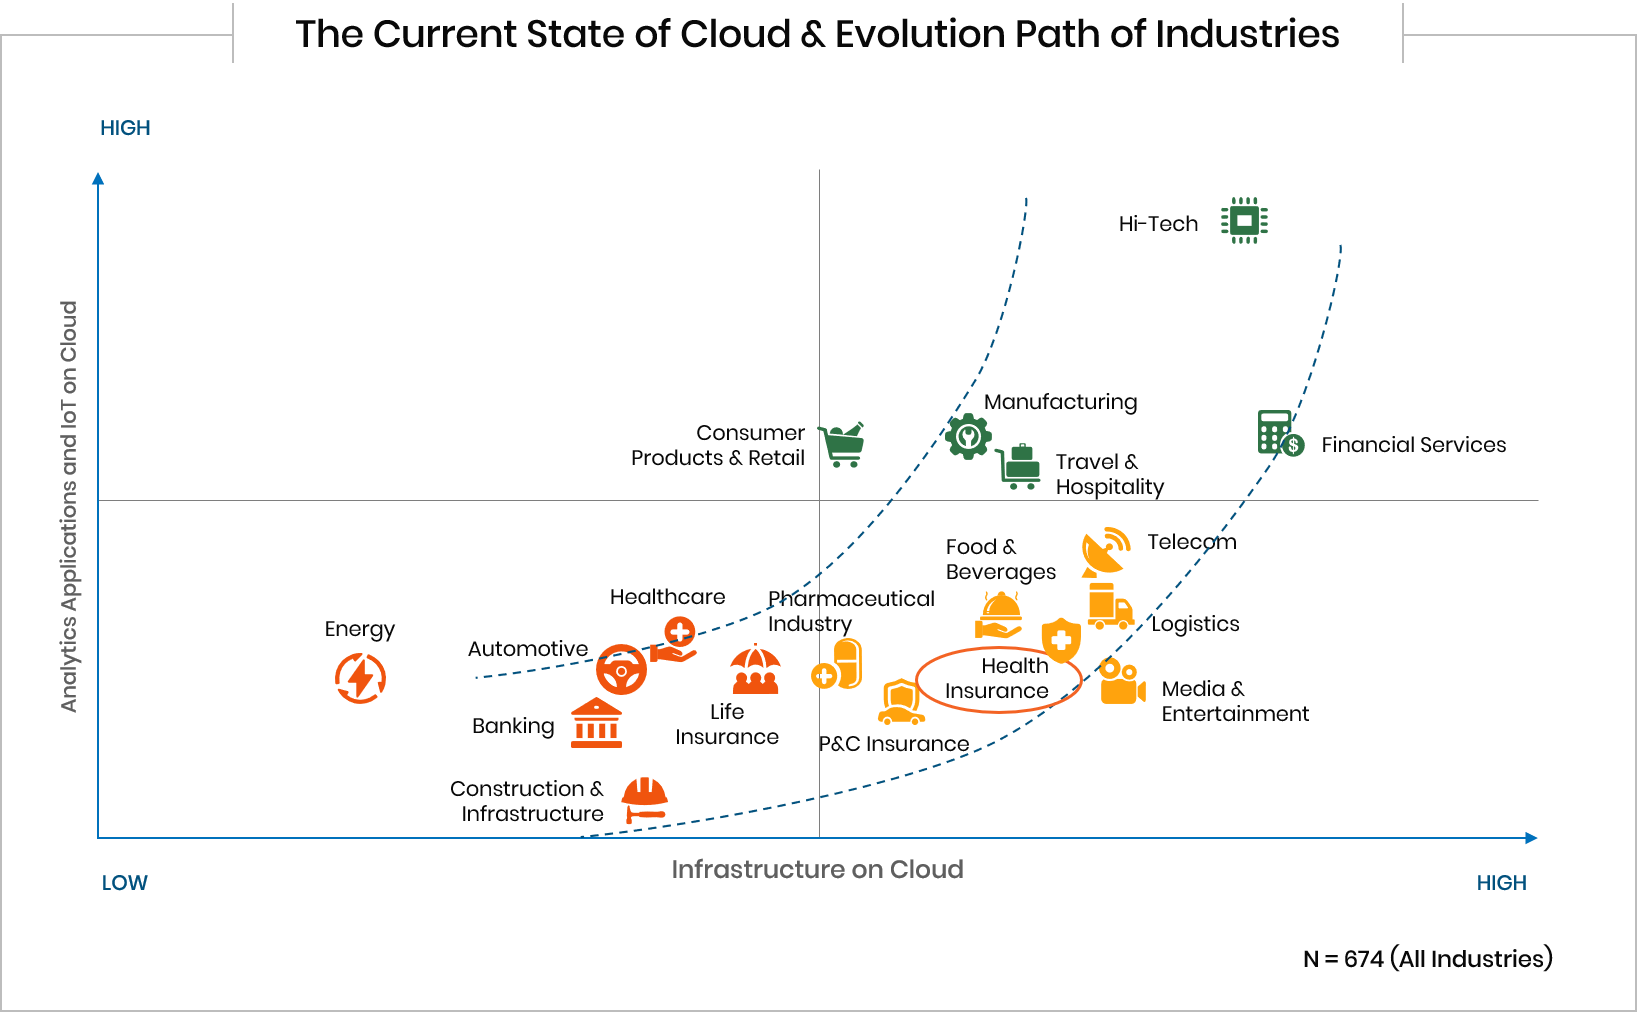 Evaluation Path of Industries